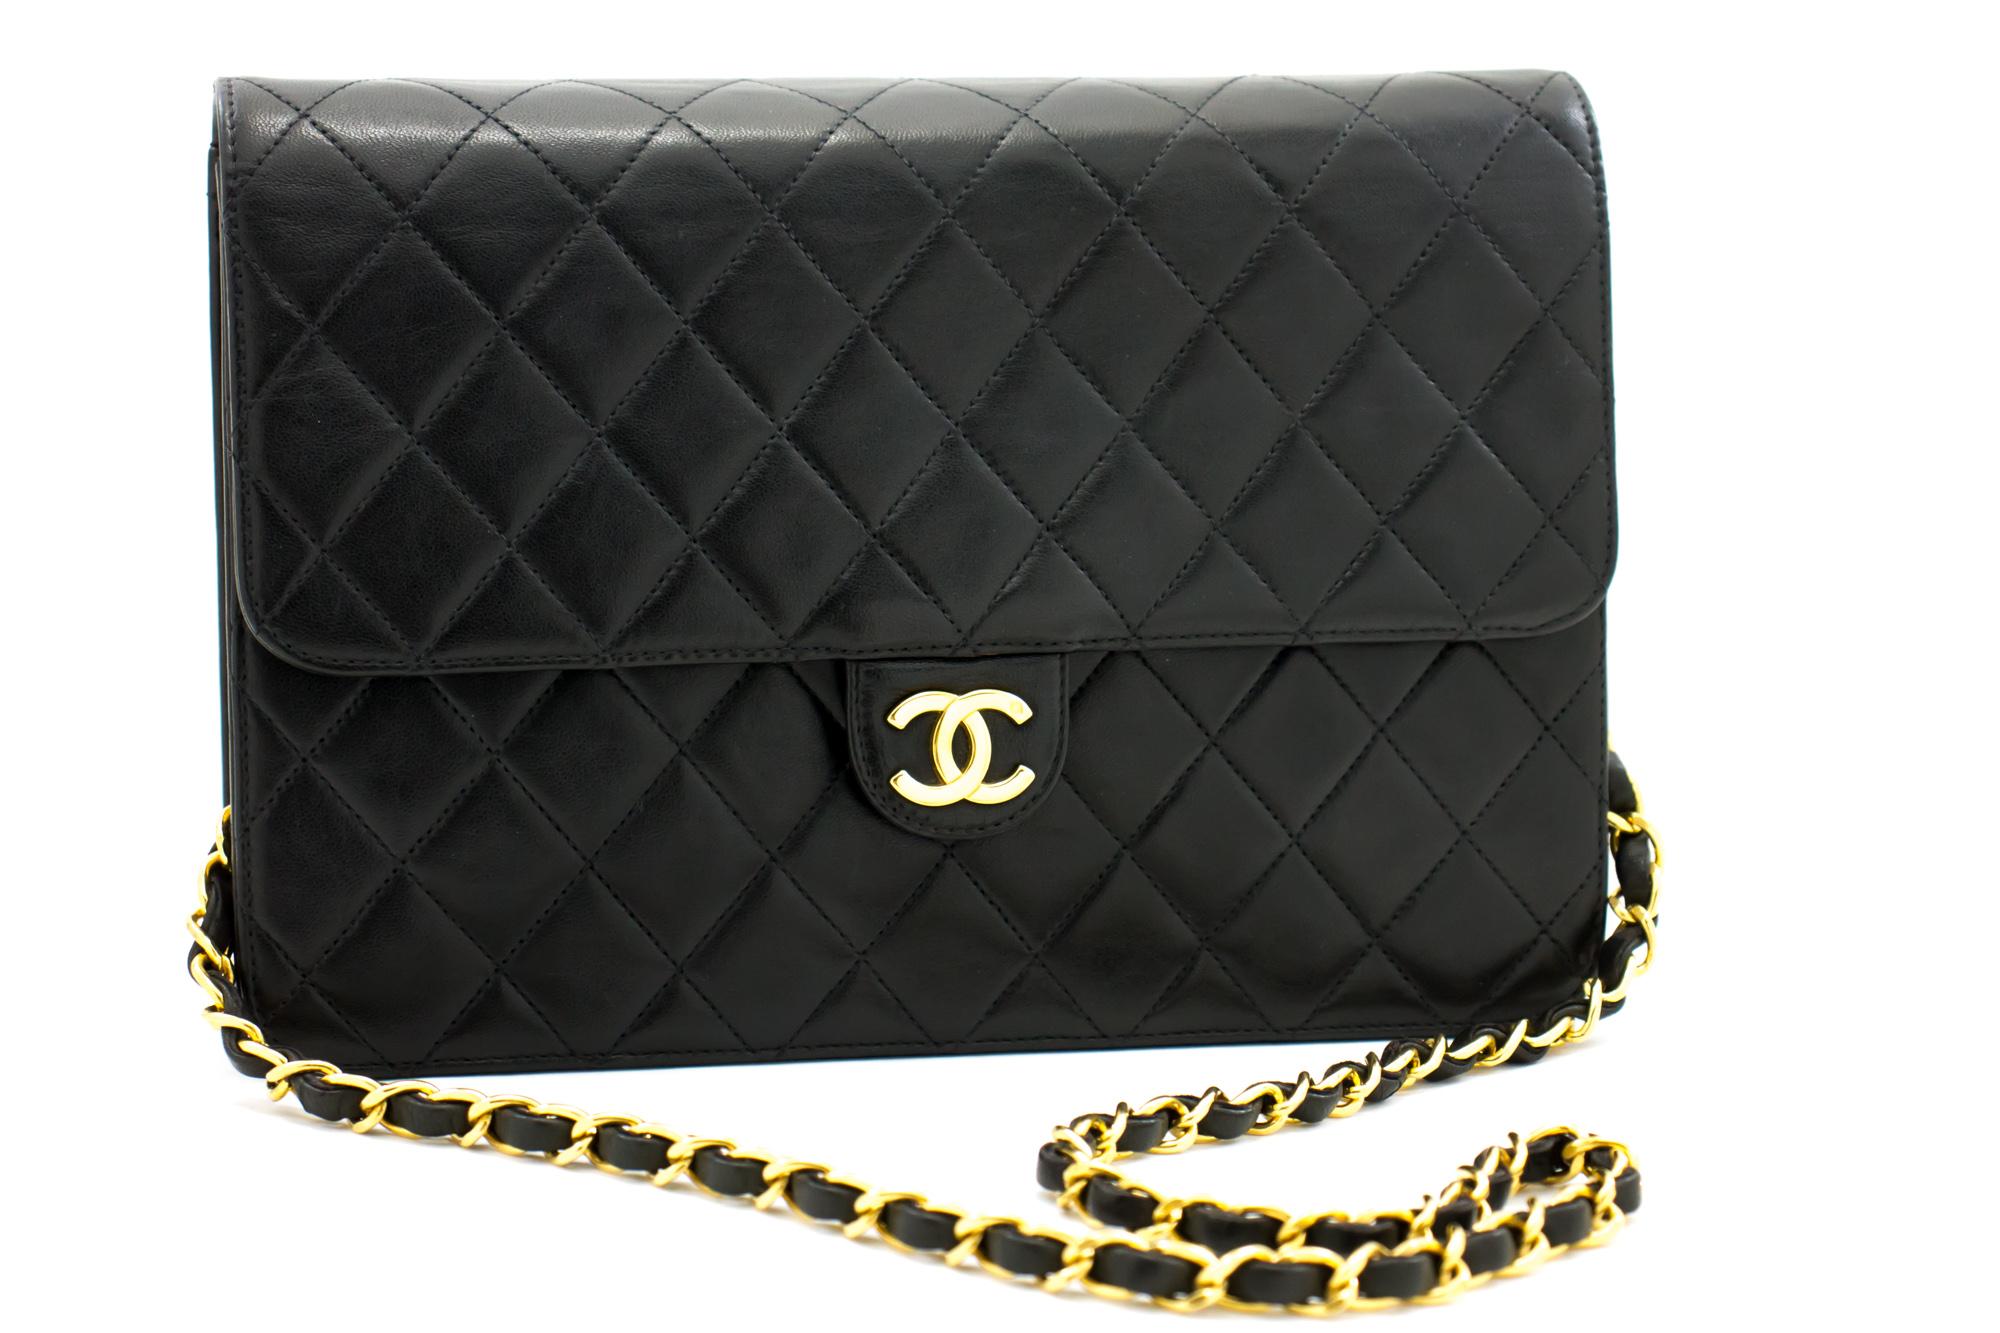 An authentic CHANEL Chain Shoulder Bag Clutch Black Quilted Flap made of black Lambskin Purse. The color is Black. The outside material is Leather. The pattern is Solid. This item is Vintage / Classic. The year of manufacture would be